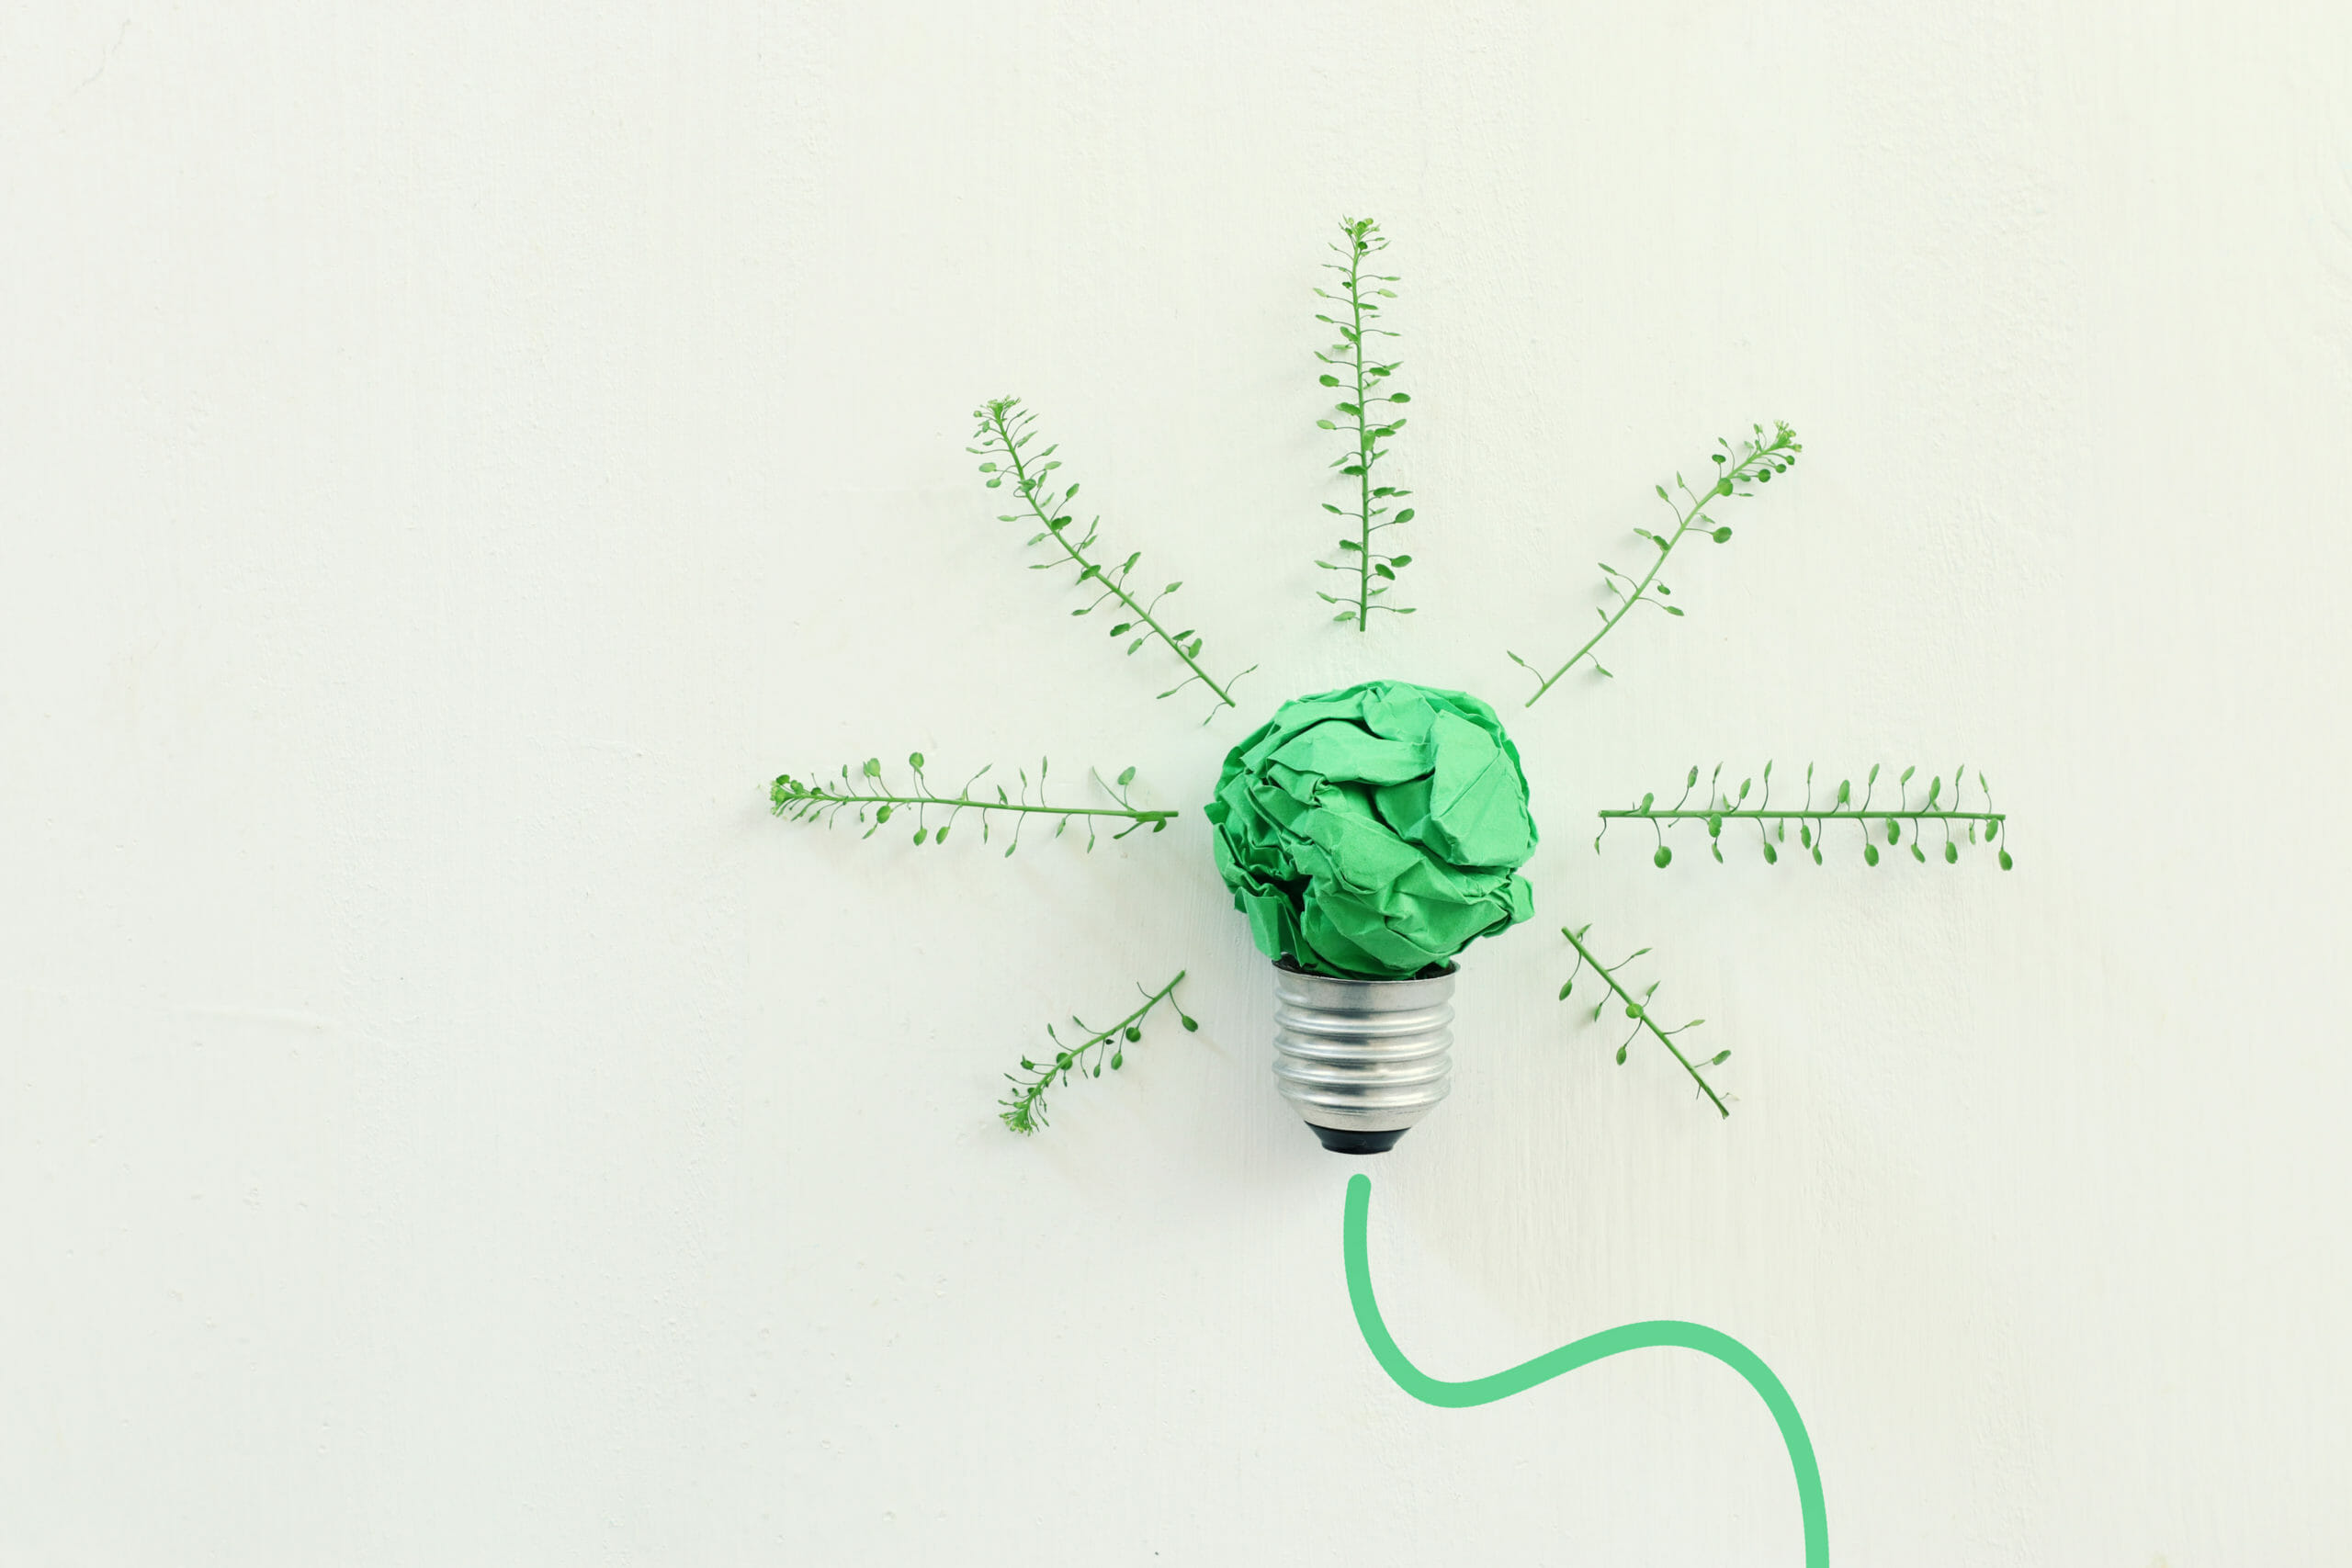 Concept,Image,If,Green,Crumpled,Paper,Lightbulb,,Symbol,Of,Scr,